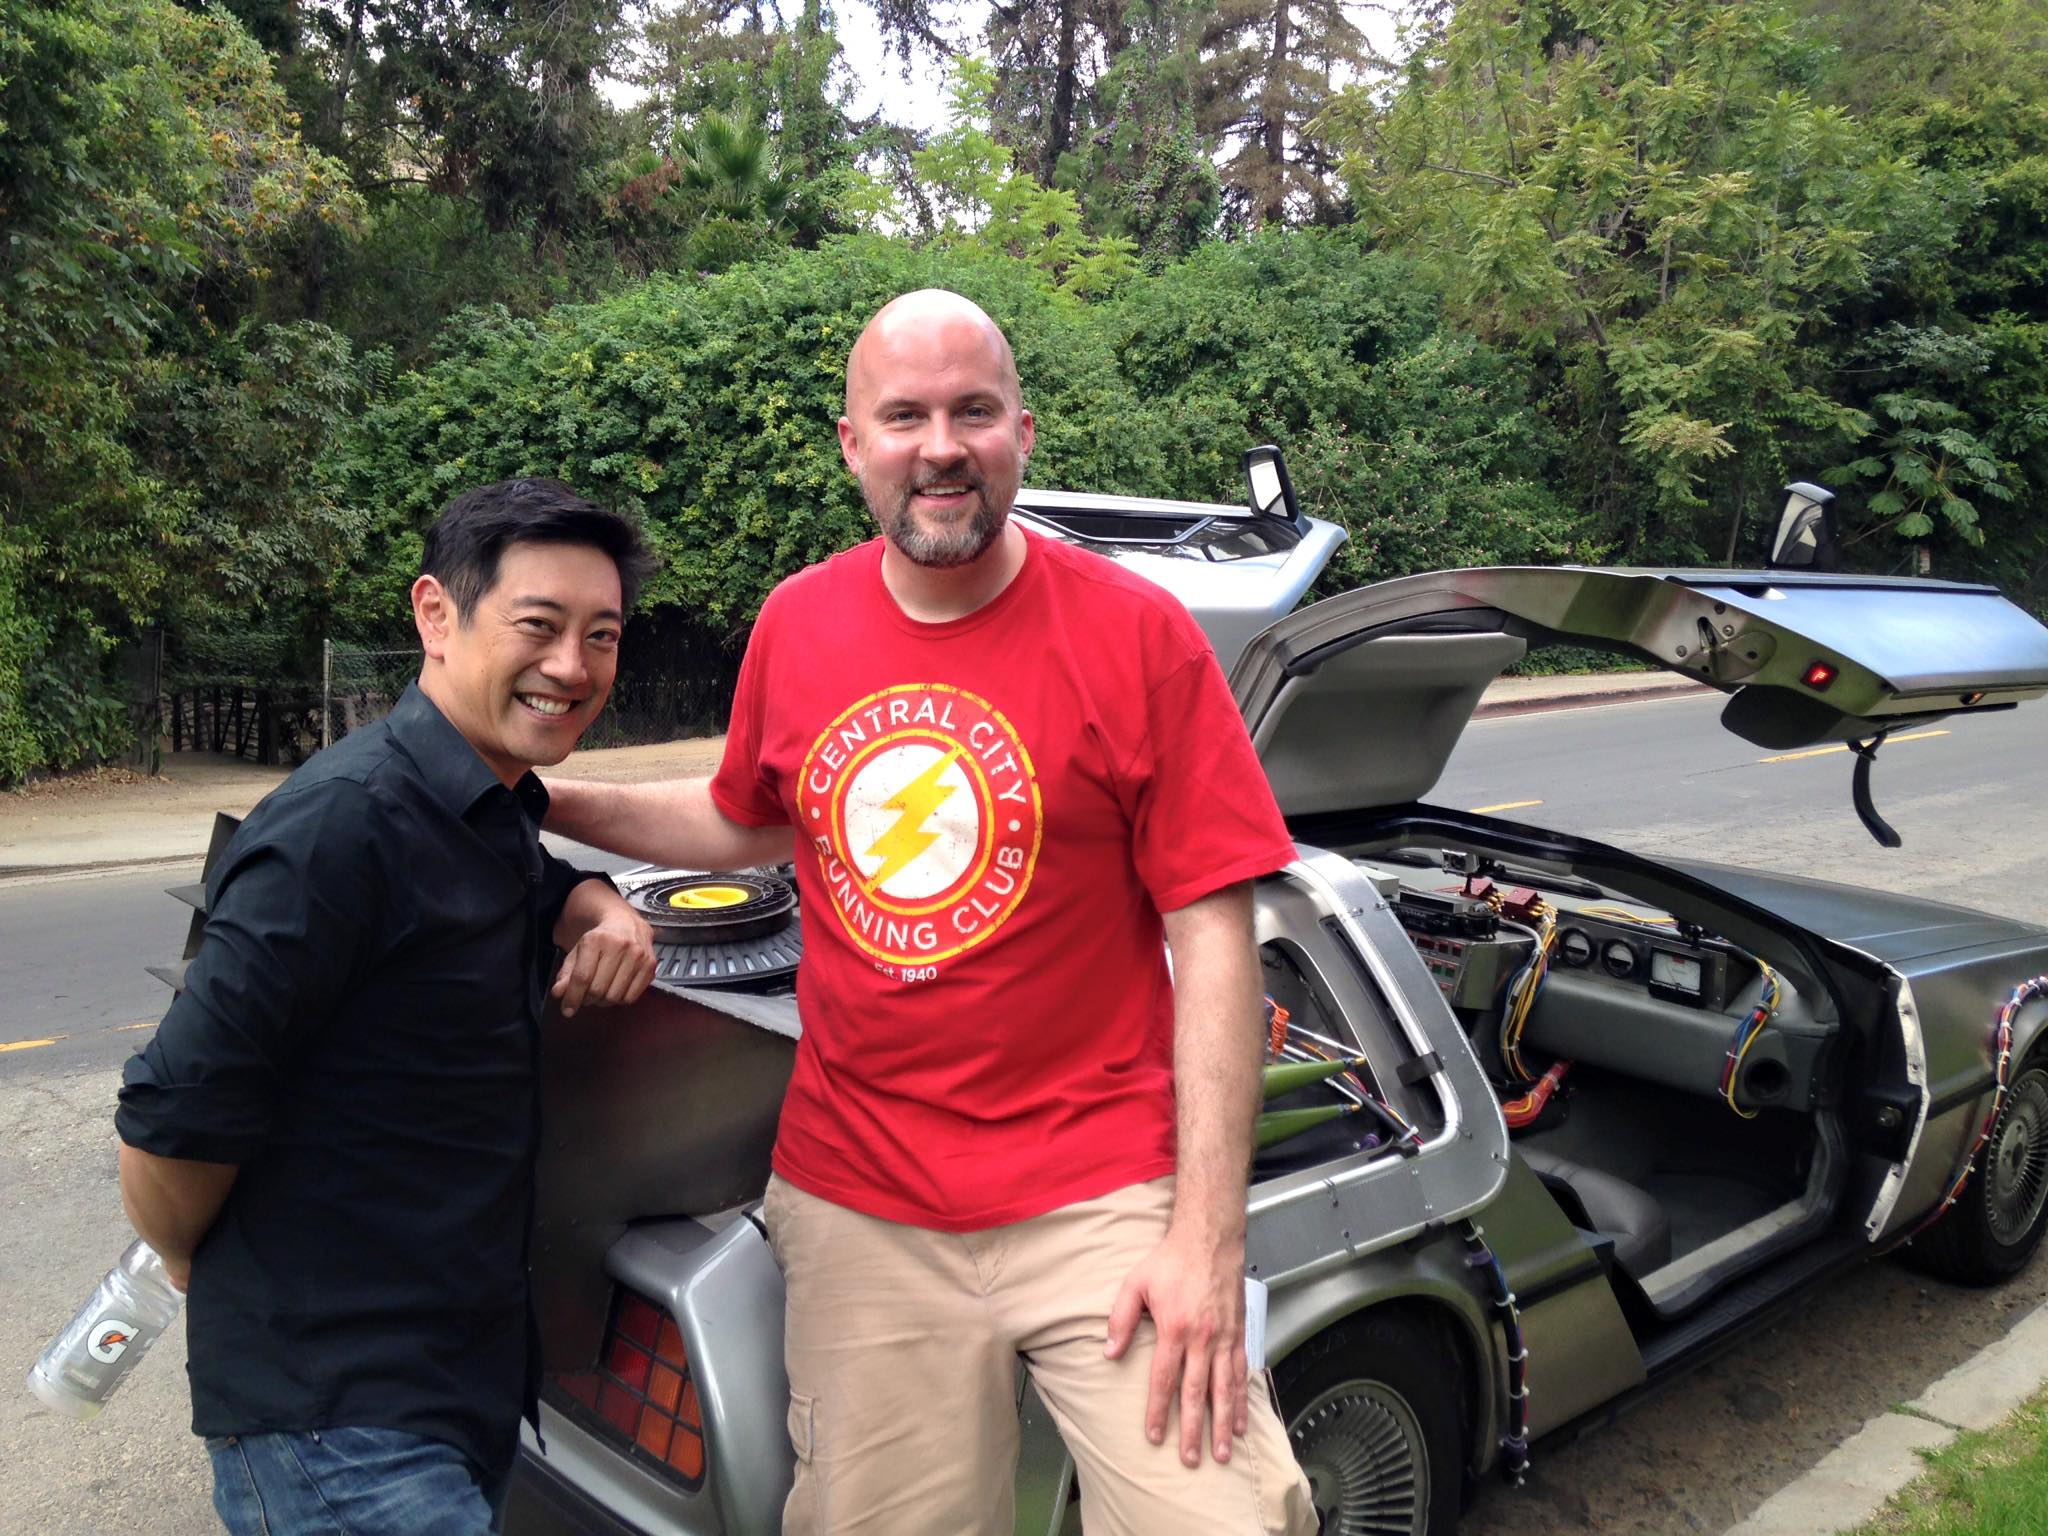 Director Jeremy Snead with host Grant Imahara on location.